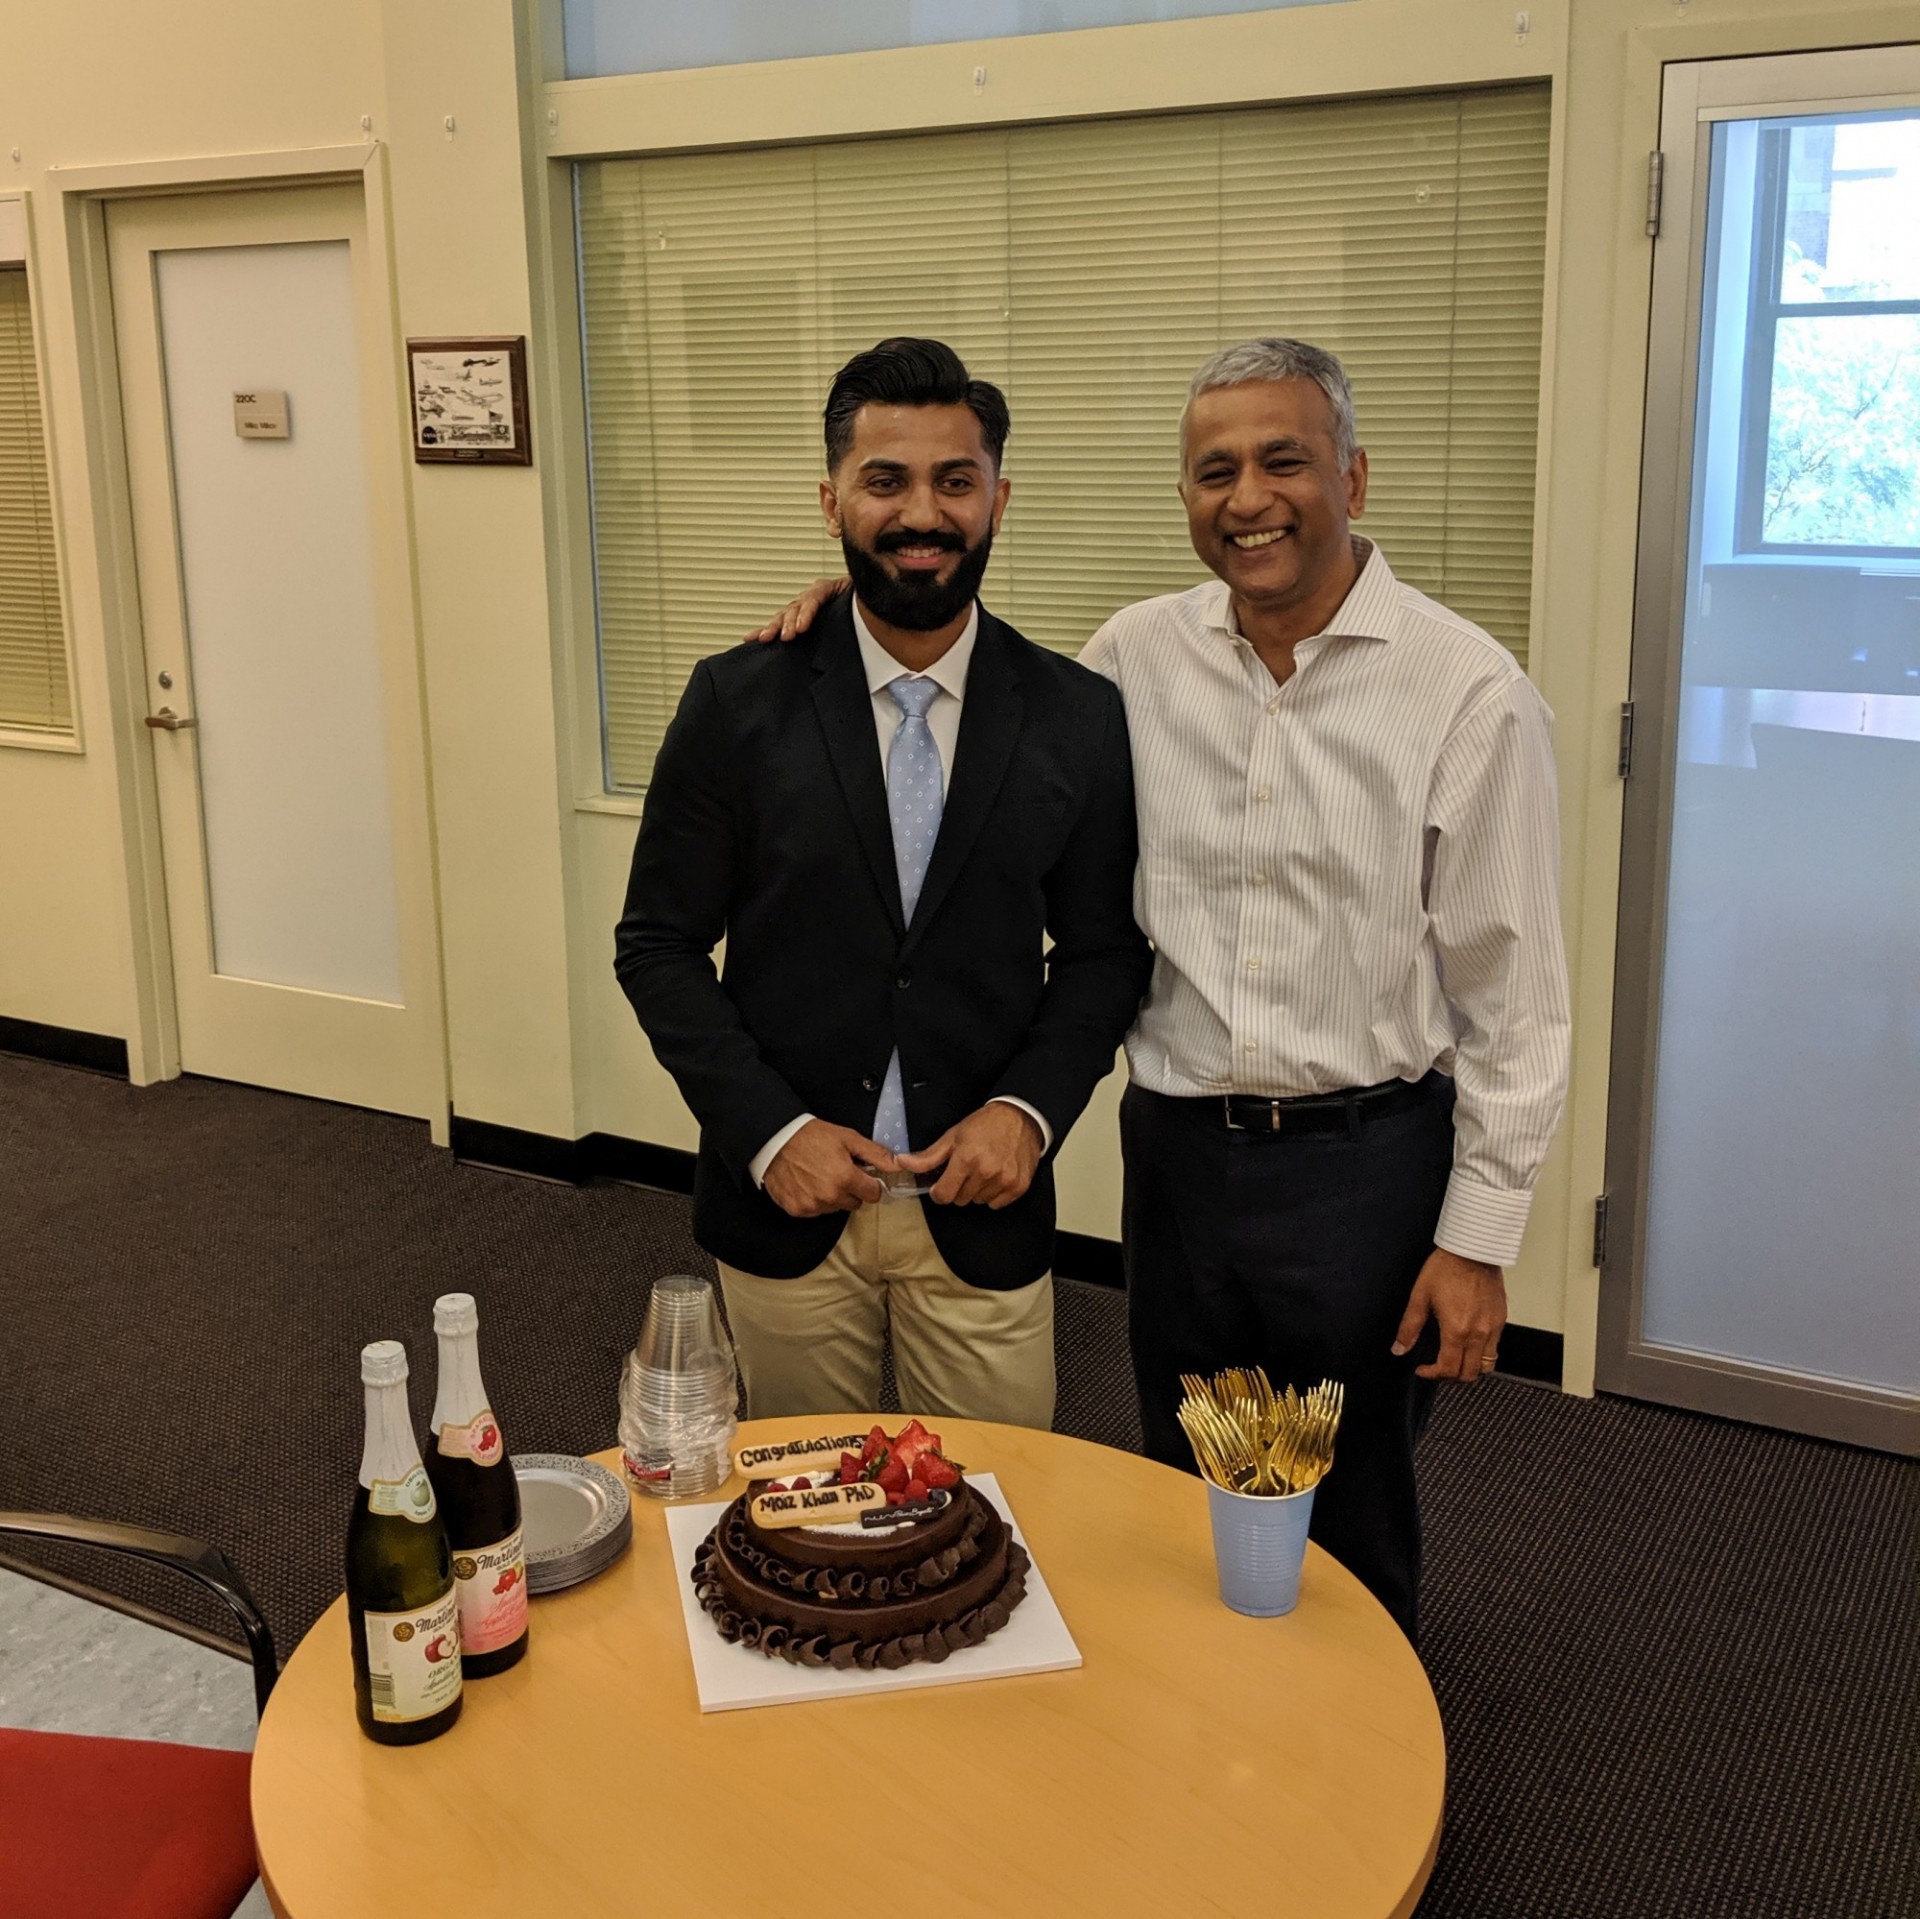 Dr. Khan and Dr. Agrawal celebrating with cake